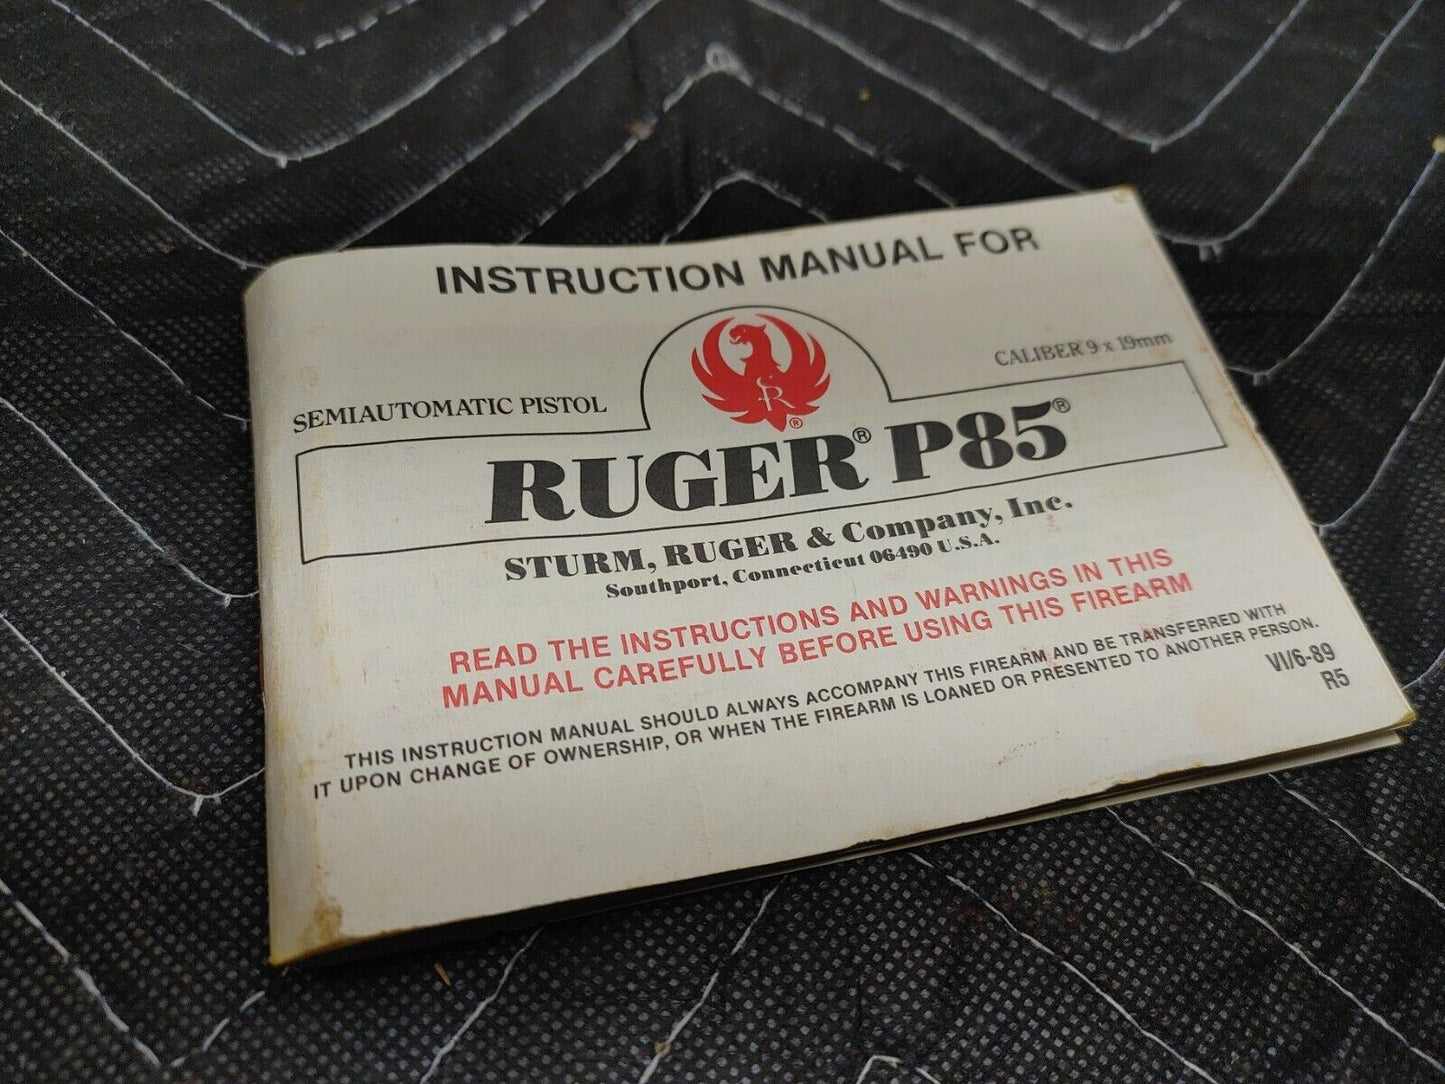 Ruger P85 9mm Factory Pistol Box with Manual (No Firearm, Box & Manual only)